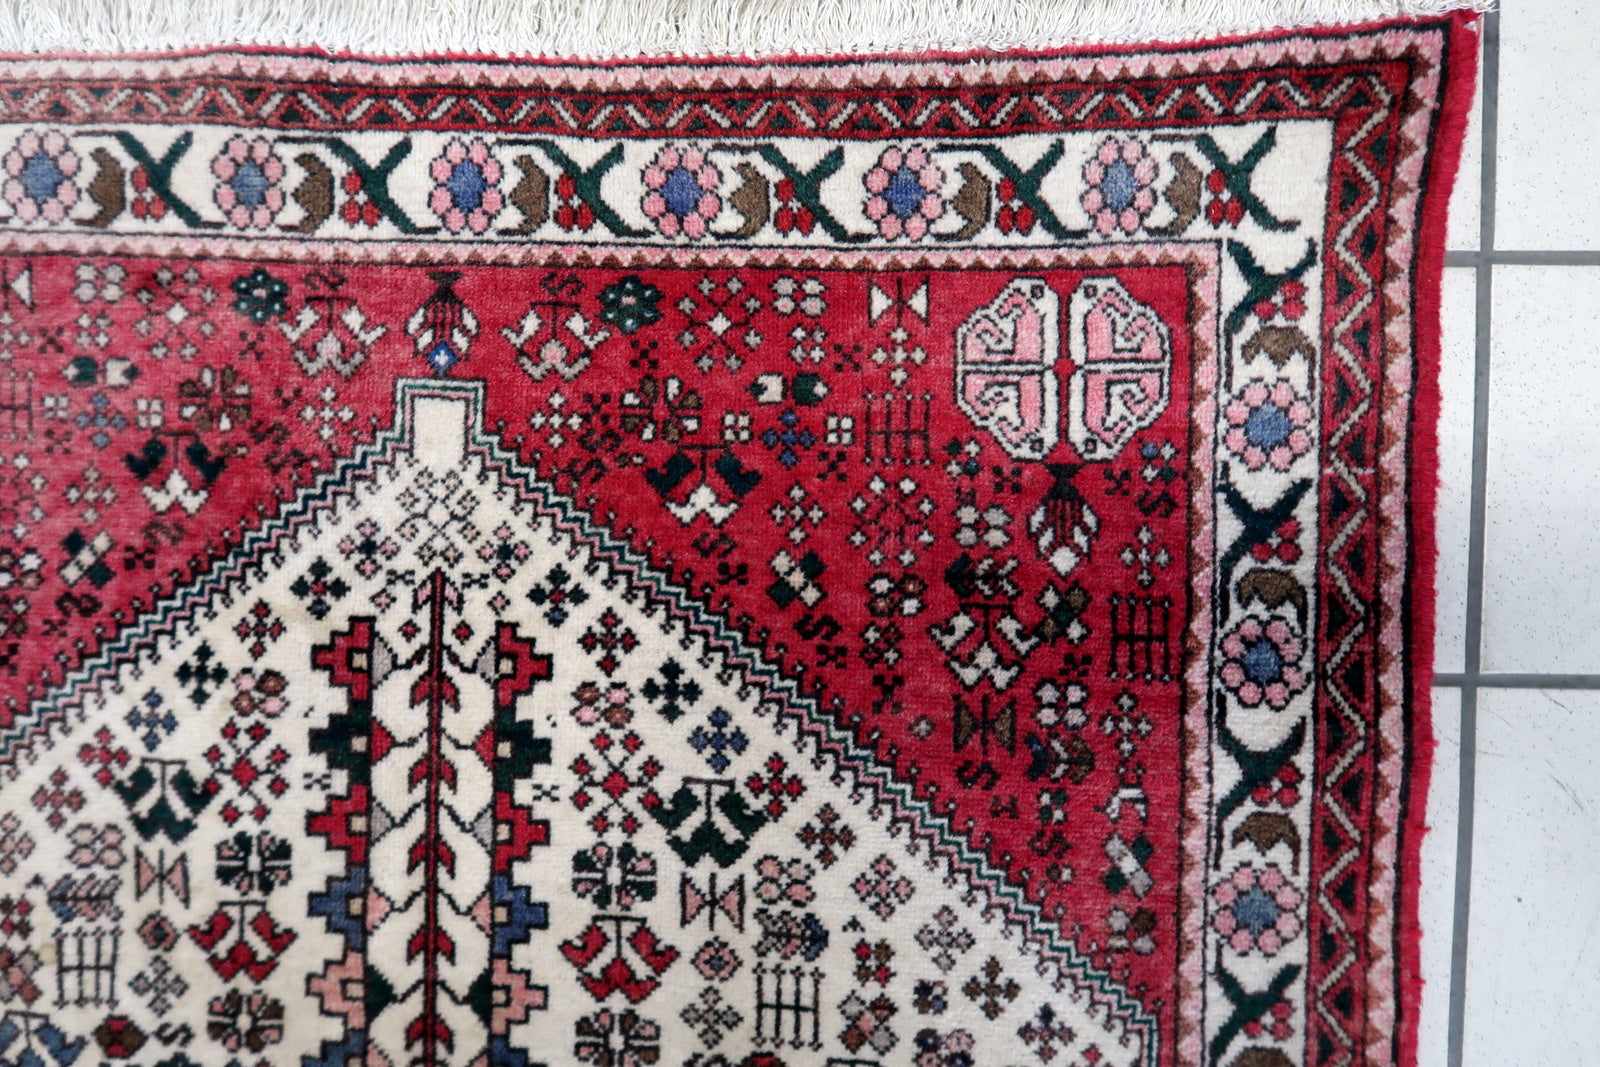 Close-up of the central part of the rug displaying an elaborate geometric design